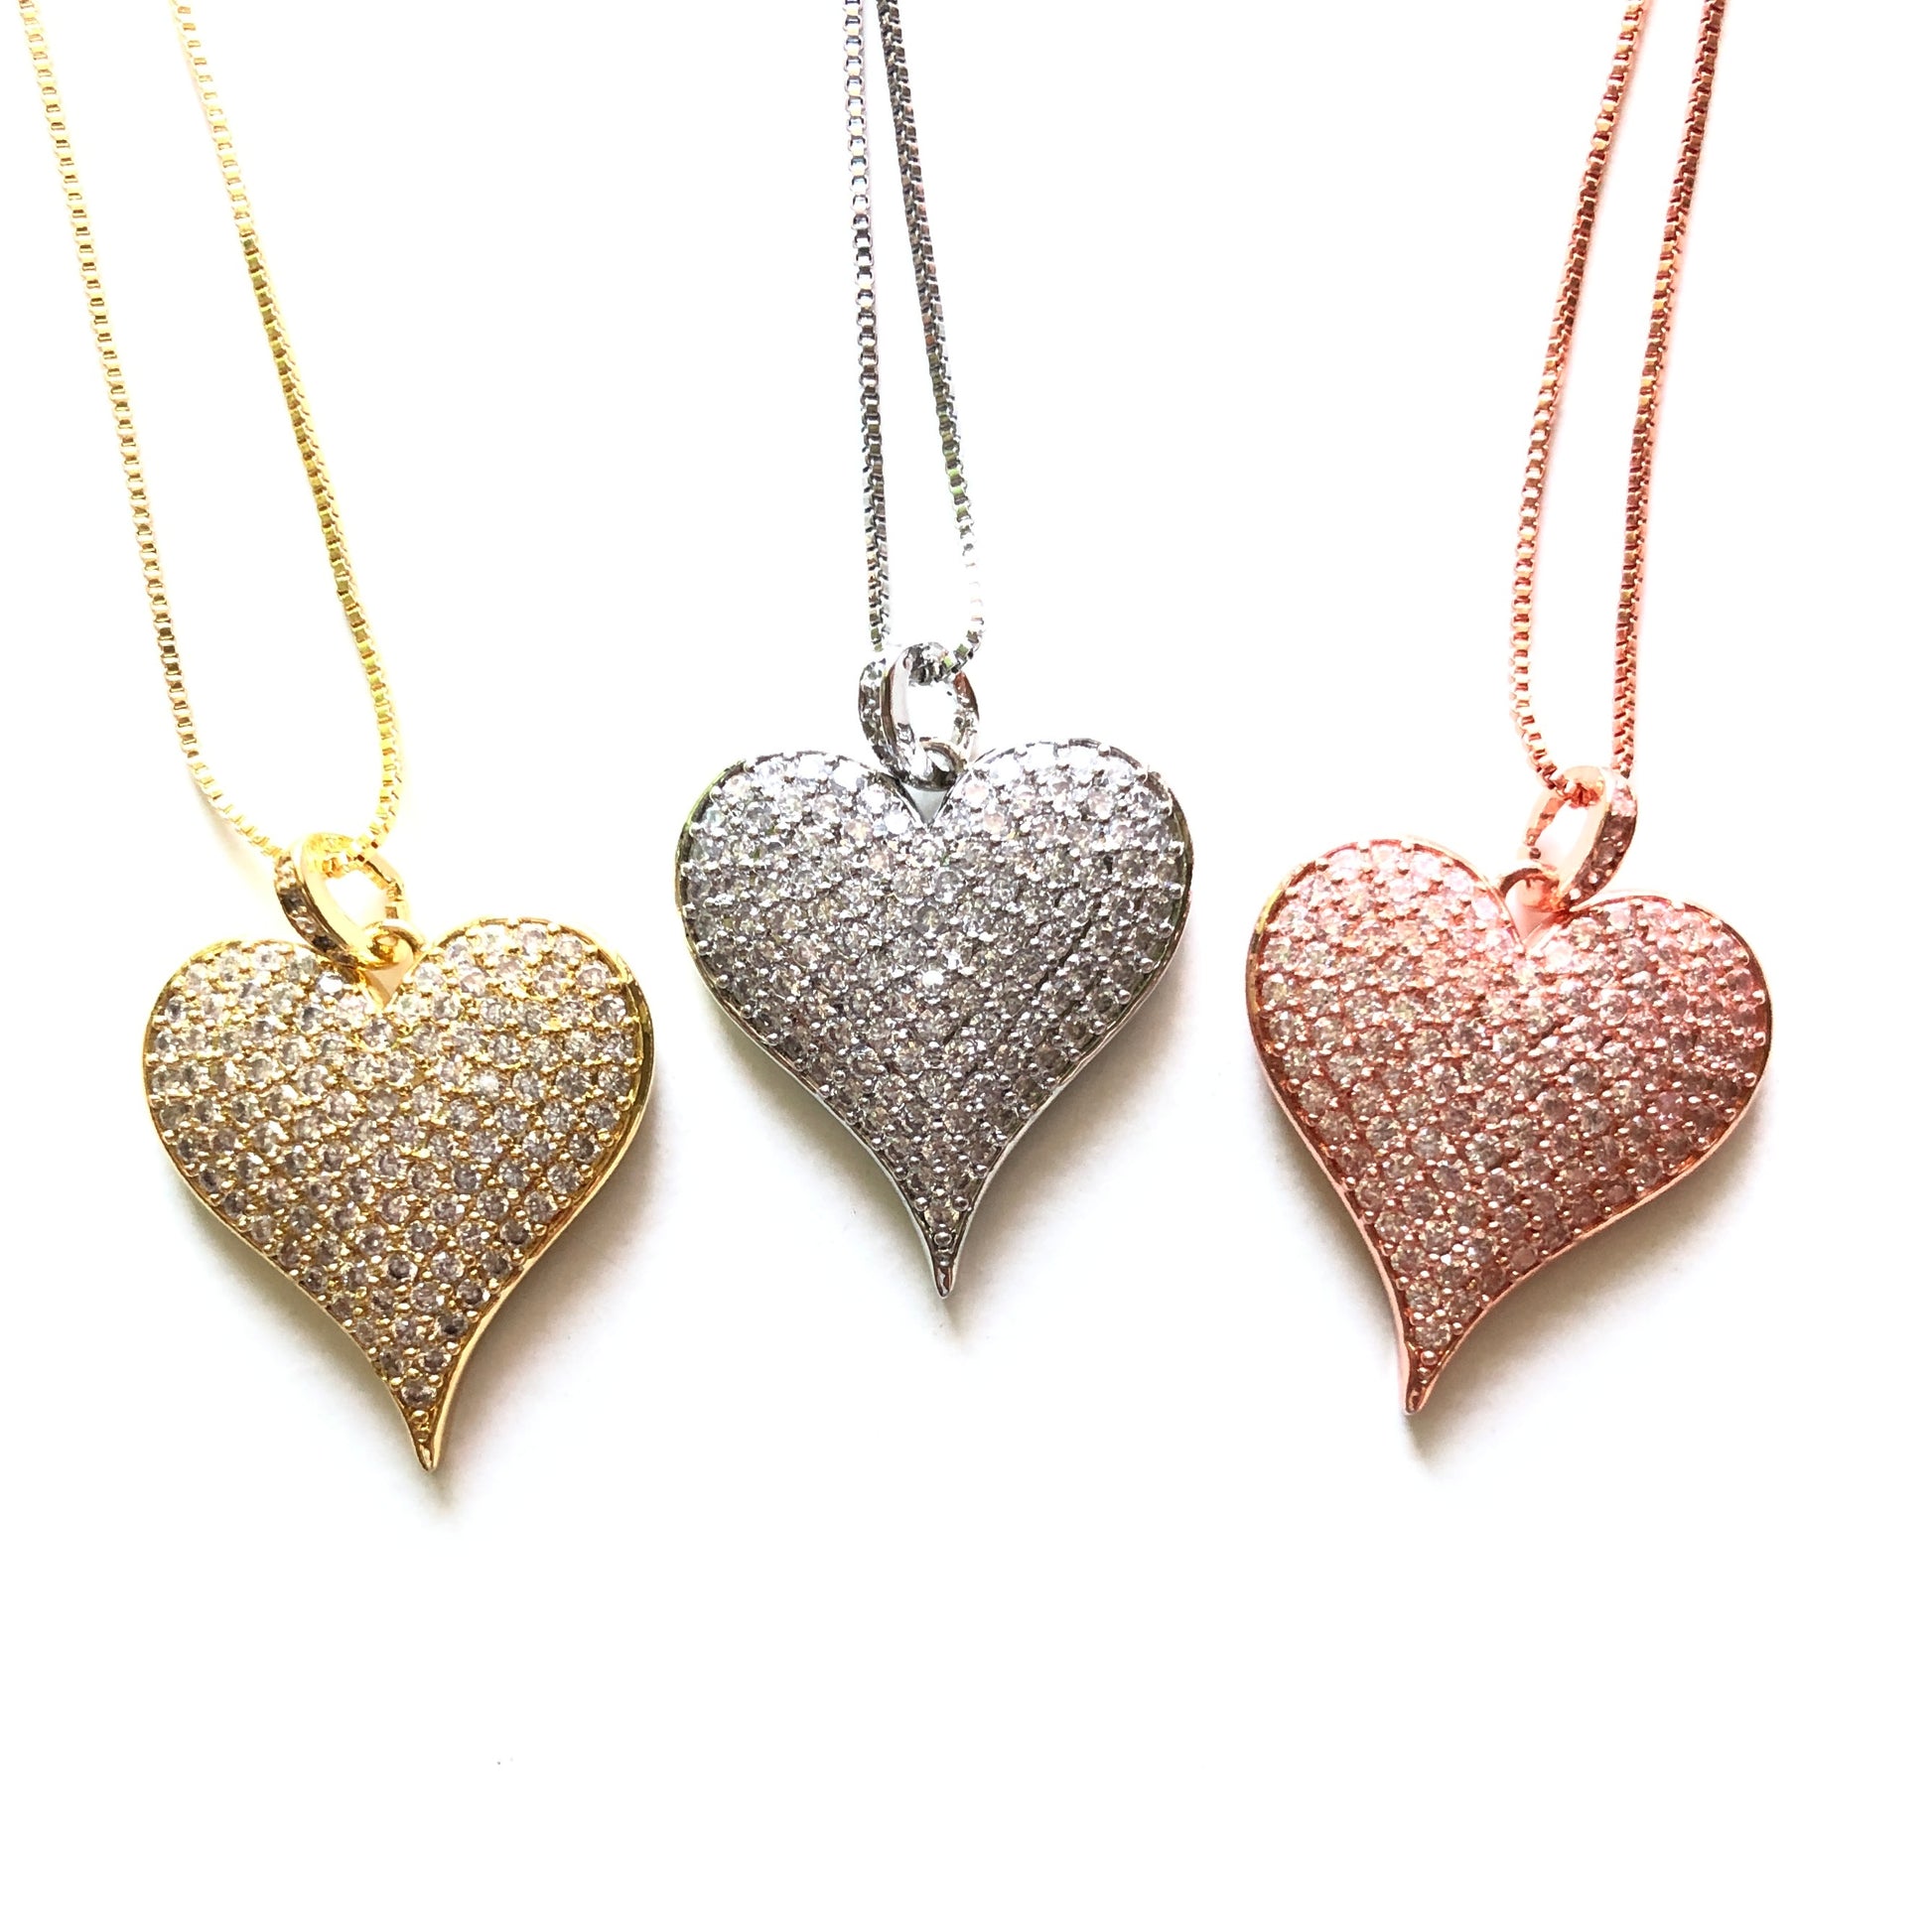 5pcs/lot 30*23mm CZ Paved Heart Necklace Necklaces Love & Heart Necklaces Charms Beads Beyond